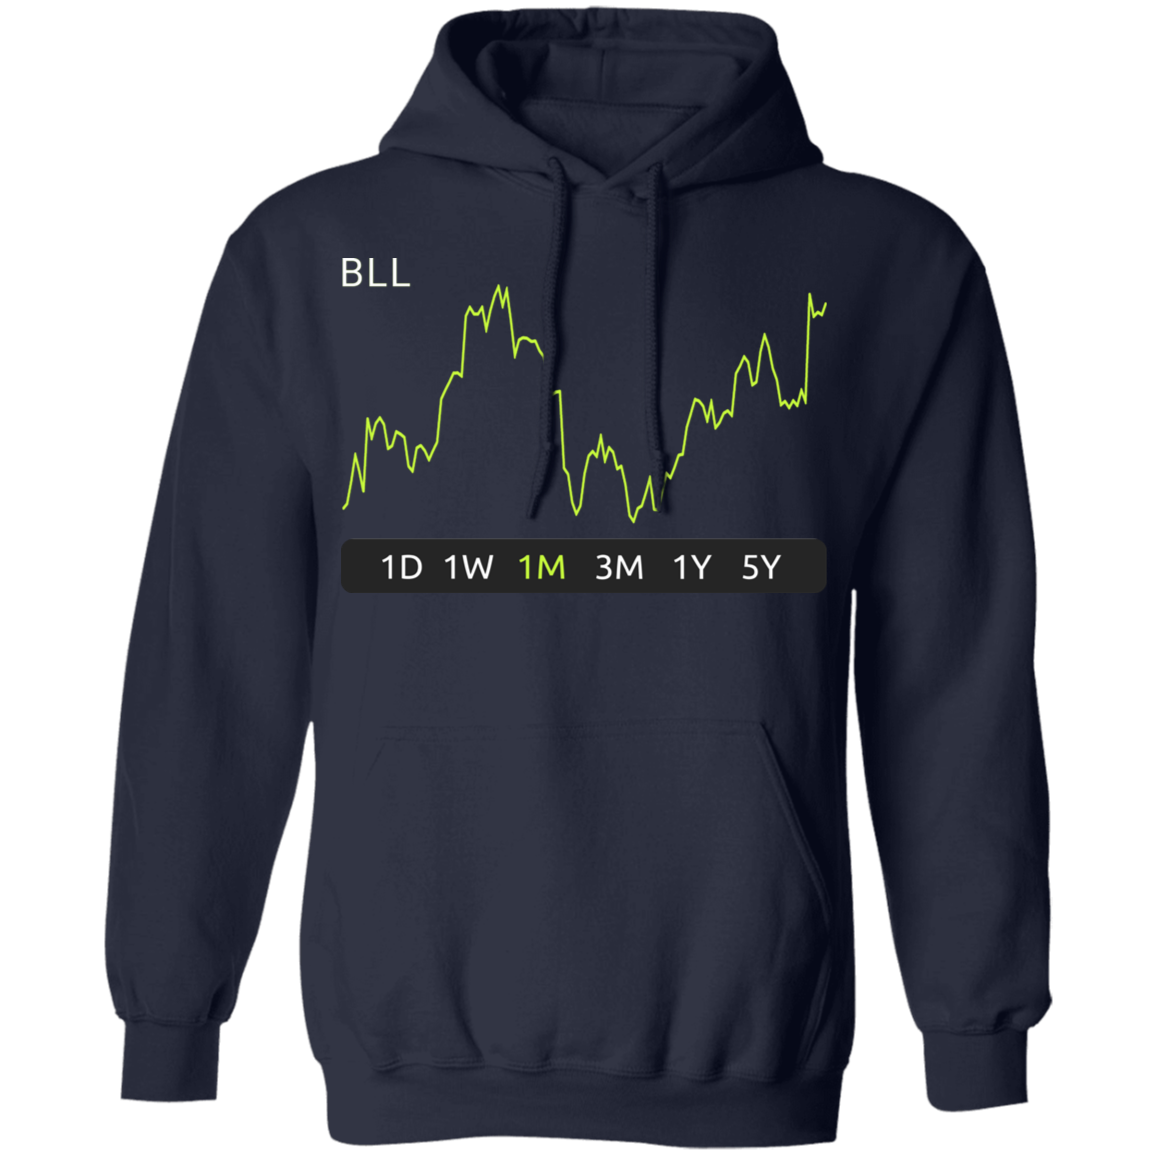 BLL Stock 1m Pullover Hoodie